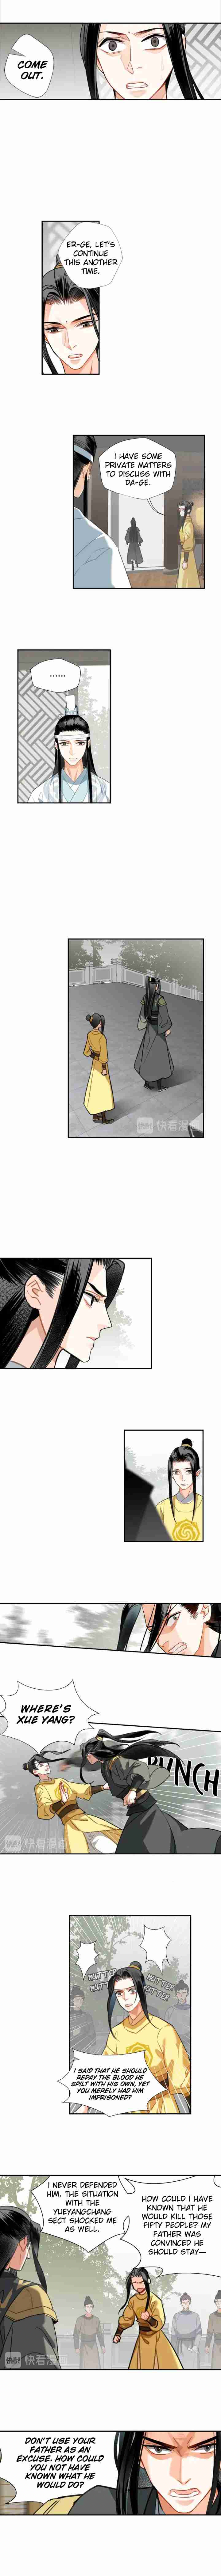 The Grandmaster of Demonic Cultivation Ch. 142